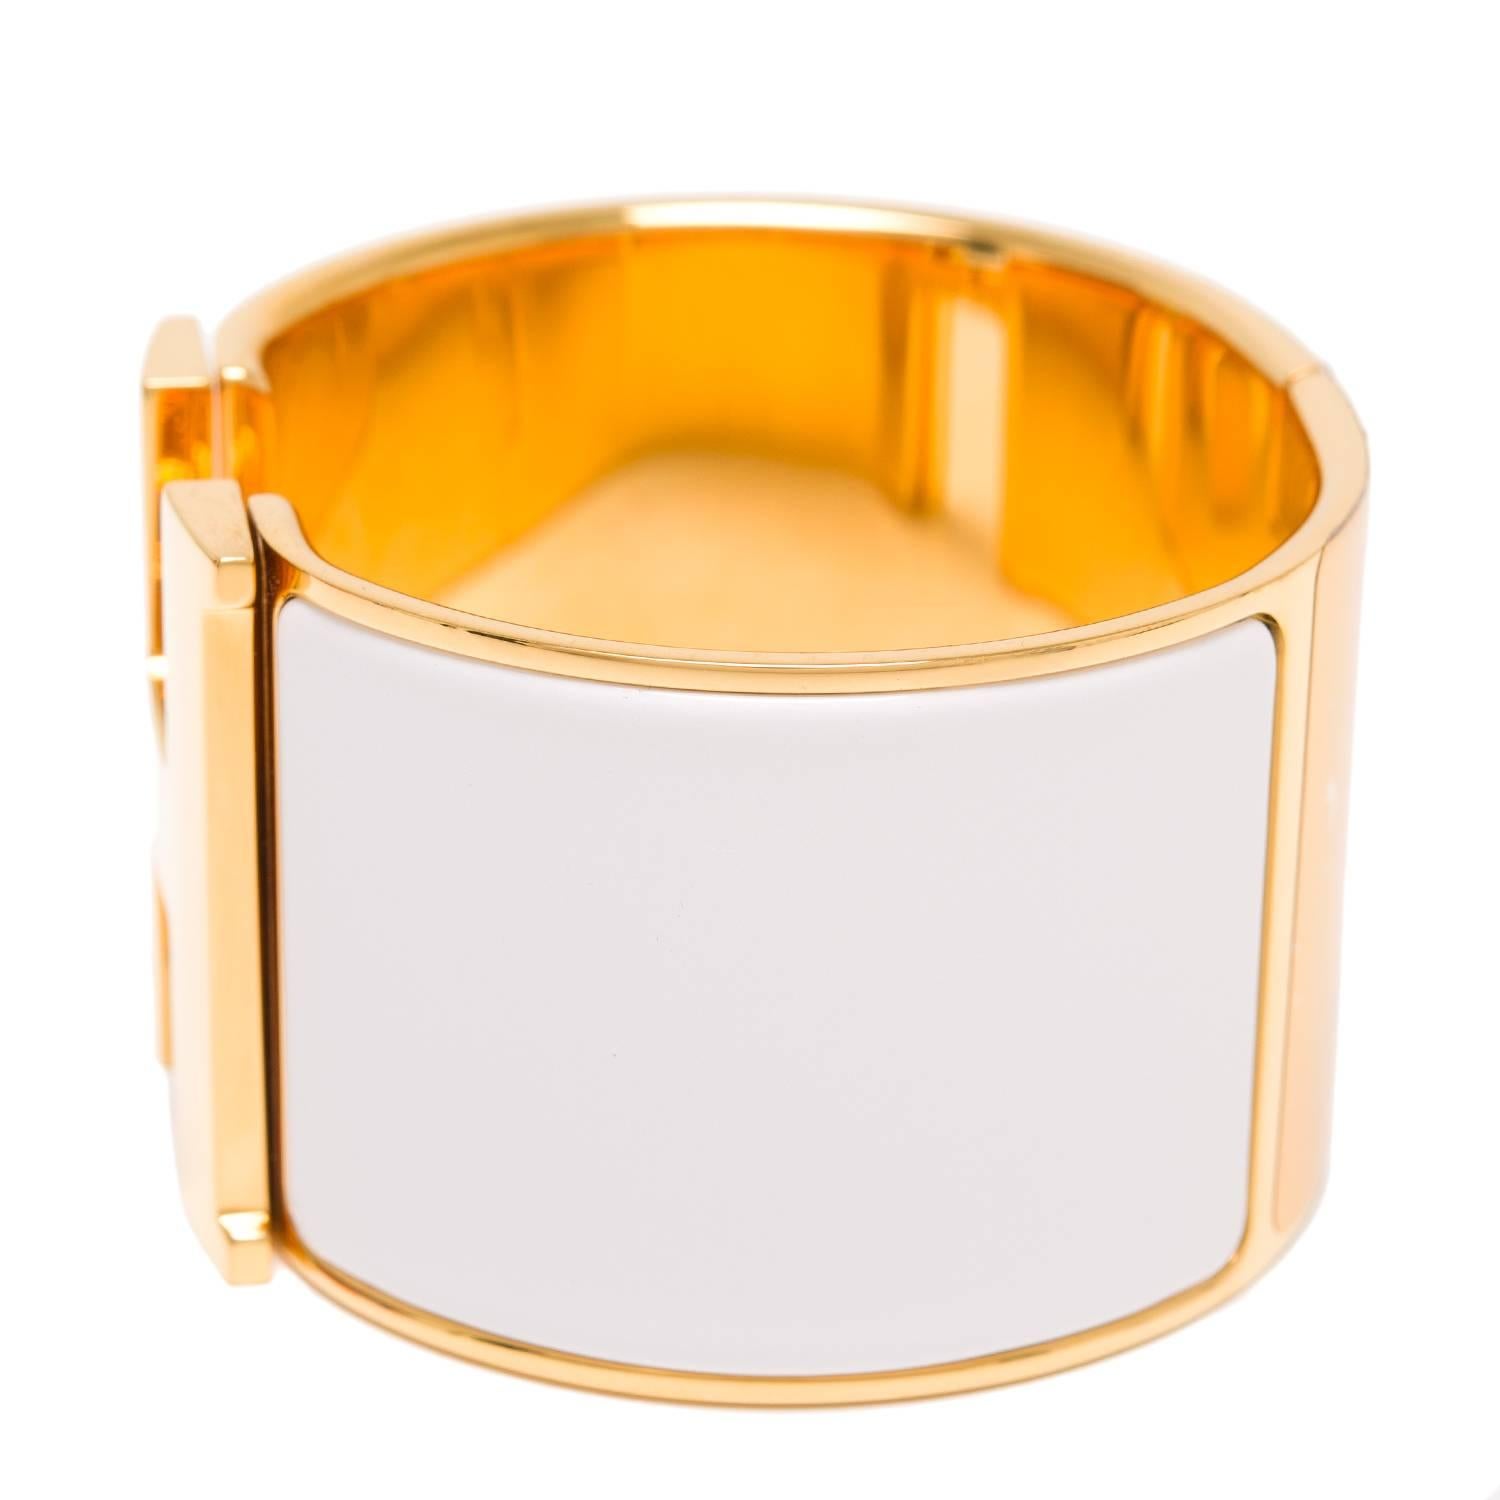 Hermes extra wide Clic Clac H bracelet in white enamel with gold plated hardware in size PM.

Origin: France

Condition: Pristine, store fresh condition

Accompanied by: Hermes box, dustbag, ribbon, carebook

Measurements: Diameter: 2.25